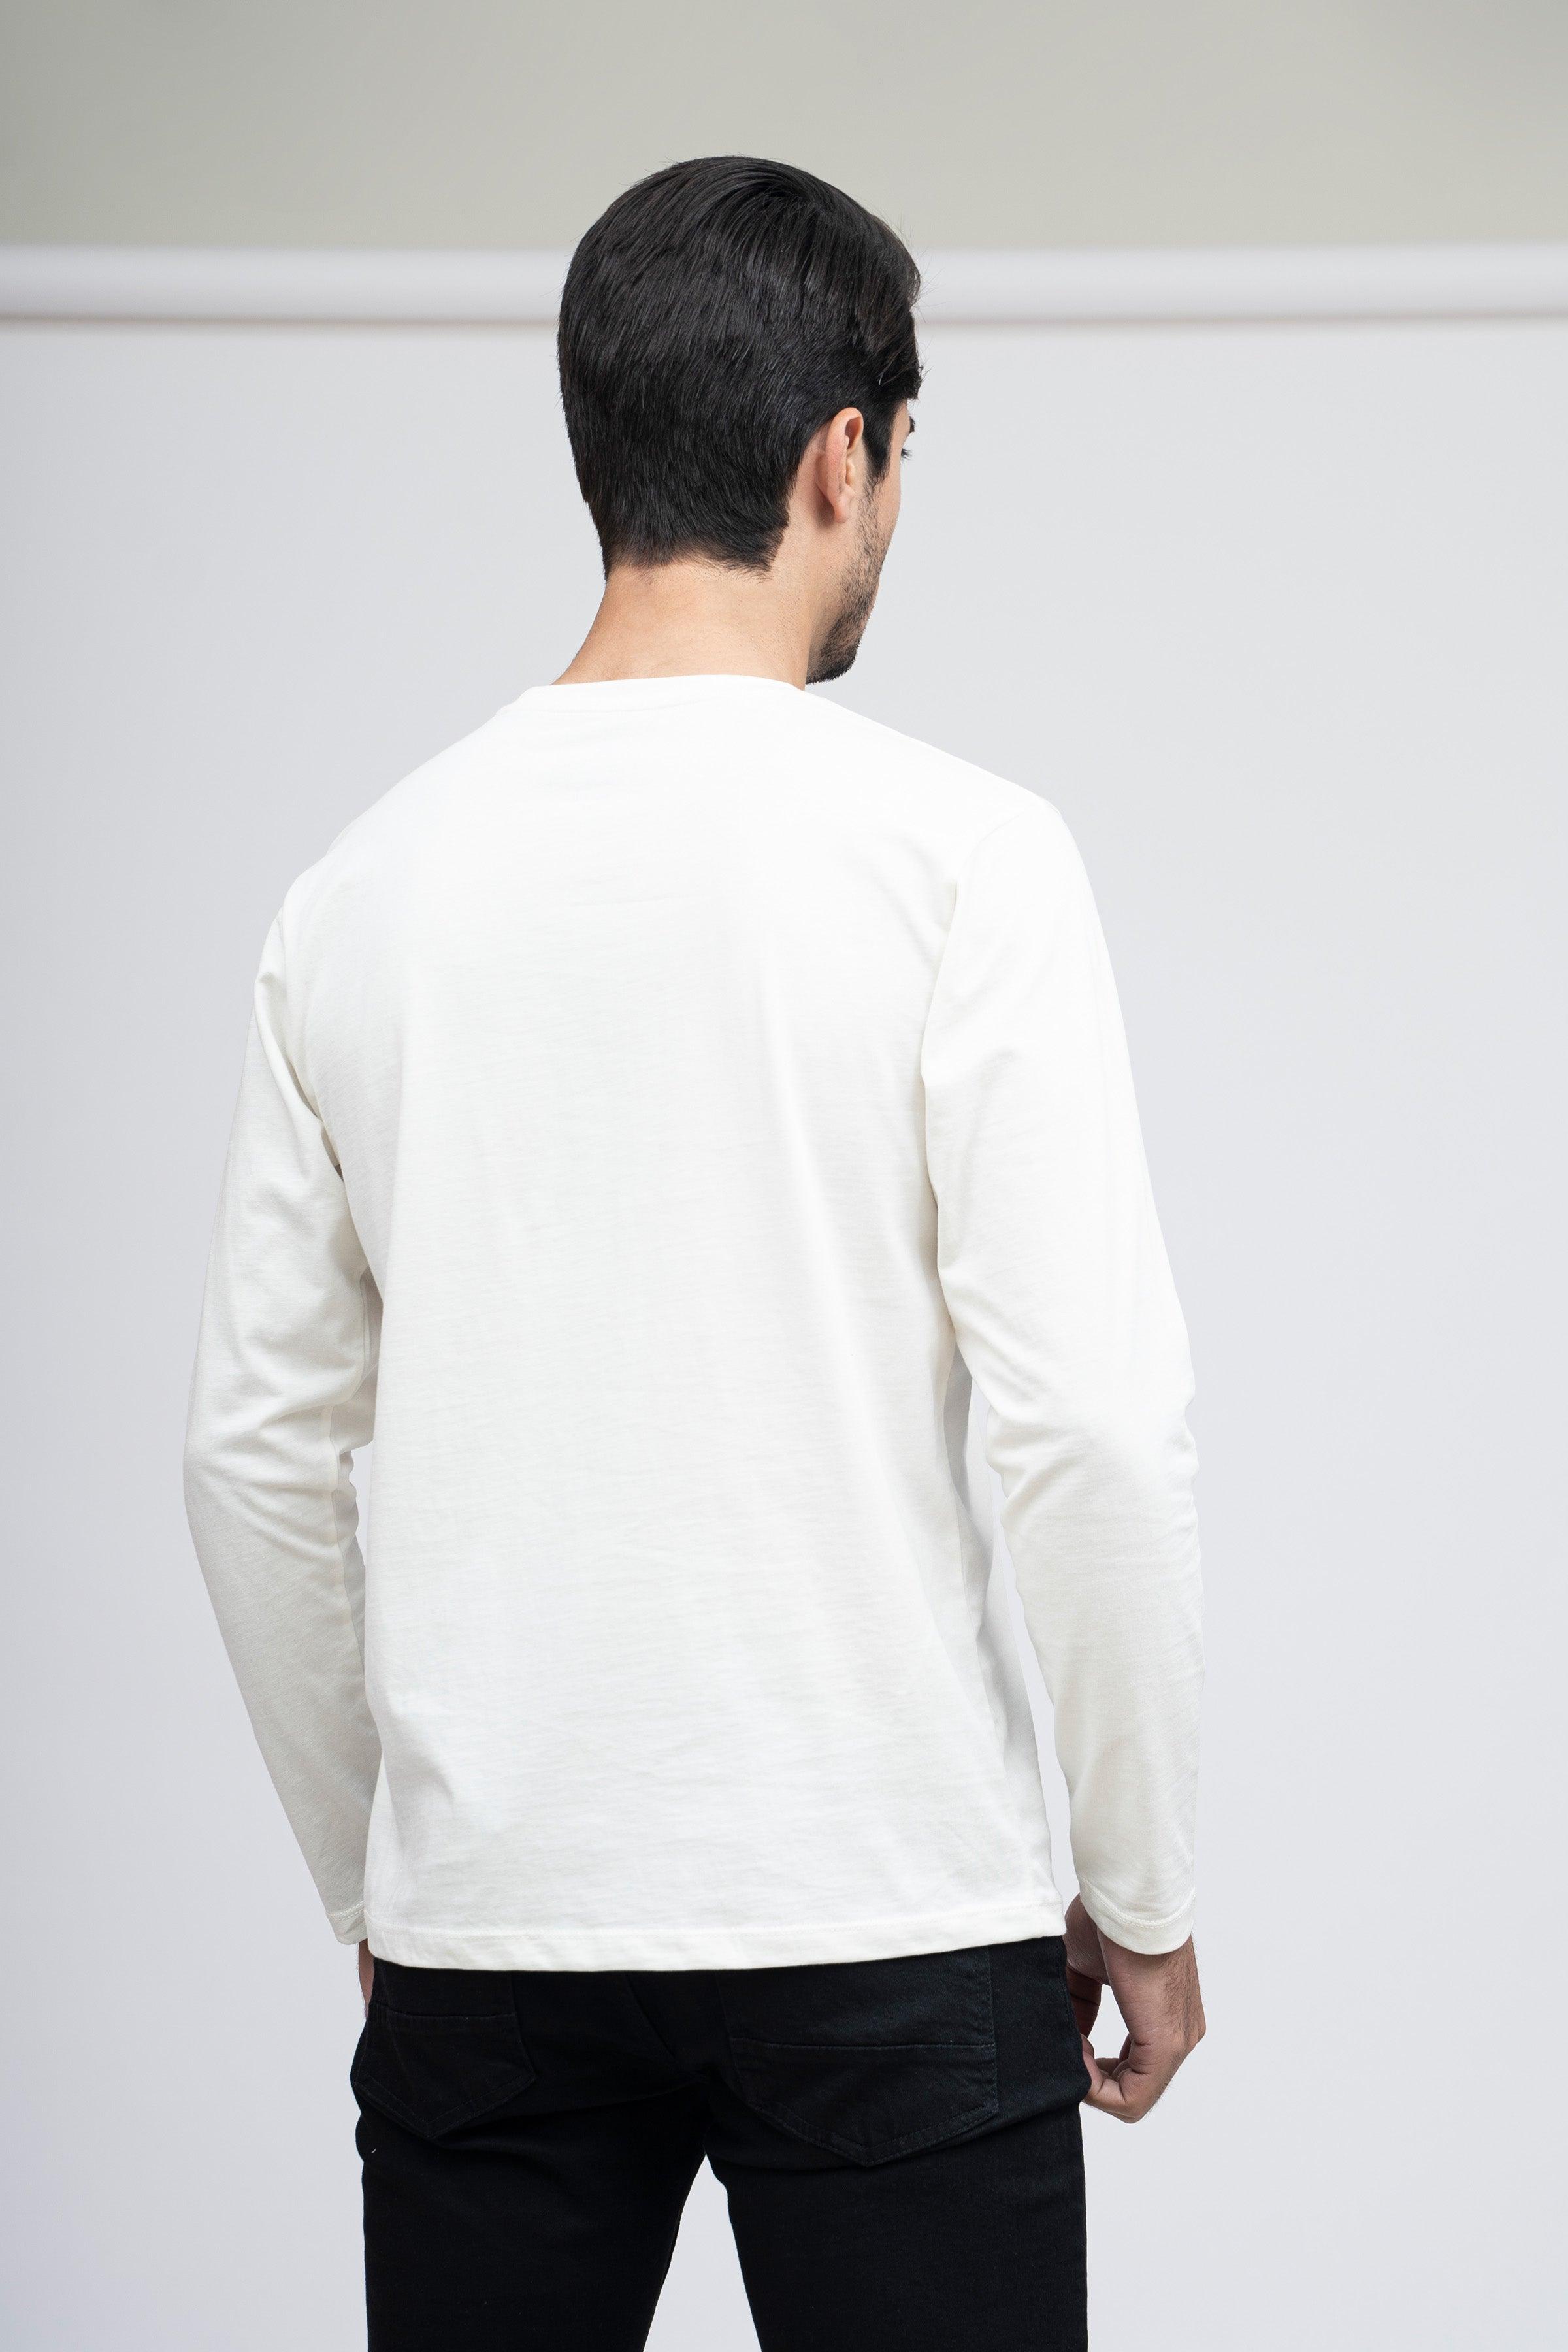 T SHIRT CREW NECK WHITE at Charcoal Clothing